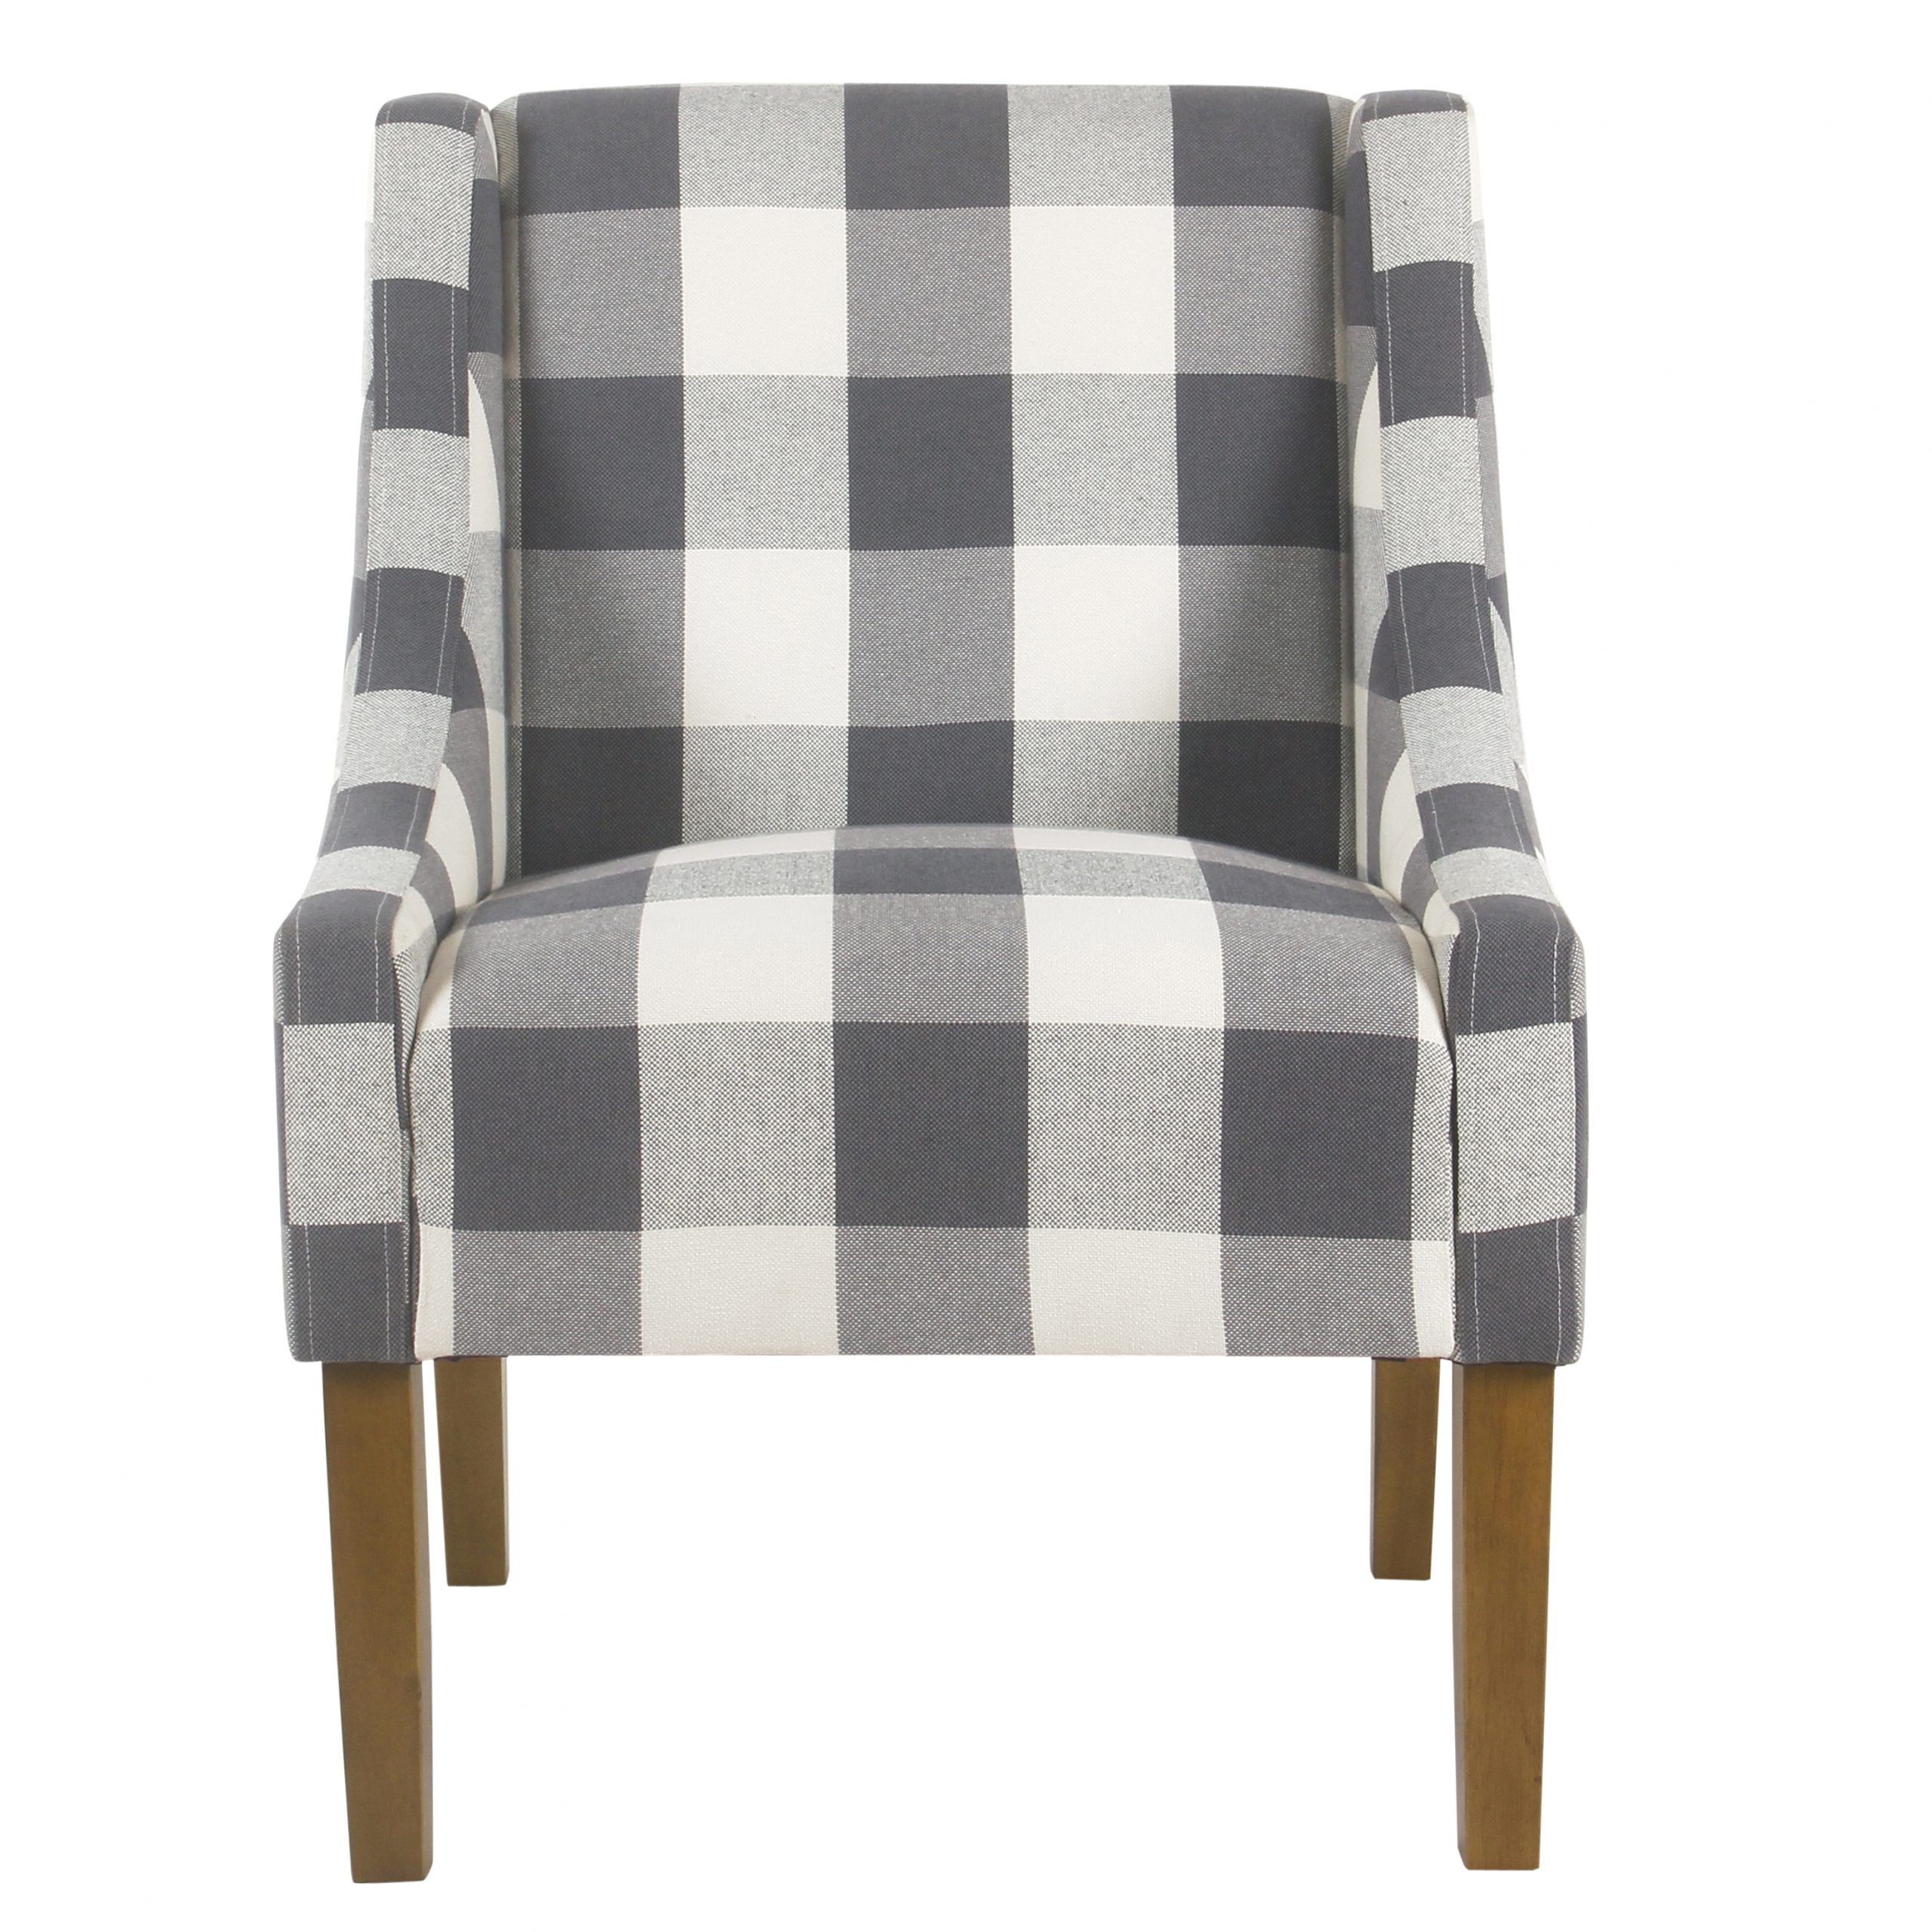 Homepop Modern Swoop Accent Chair, Gray Plaid – Walmart – Walmart Inside Smoke Gray Wood Accent Stools (View 13 of 20)